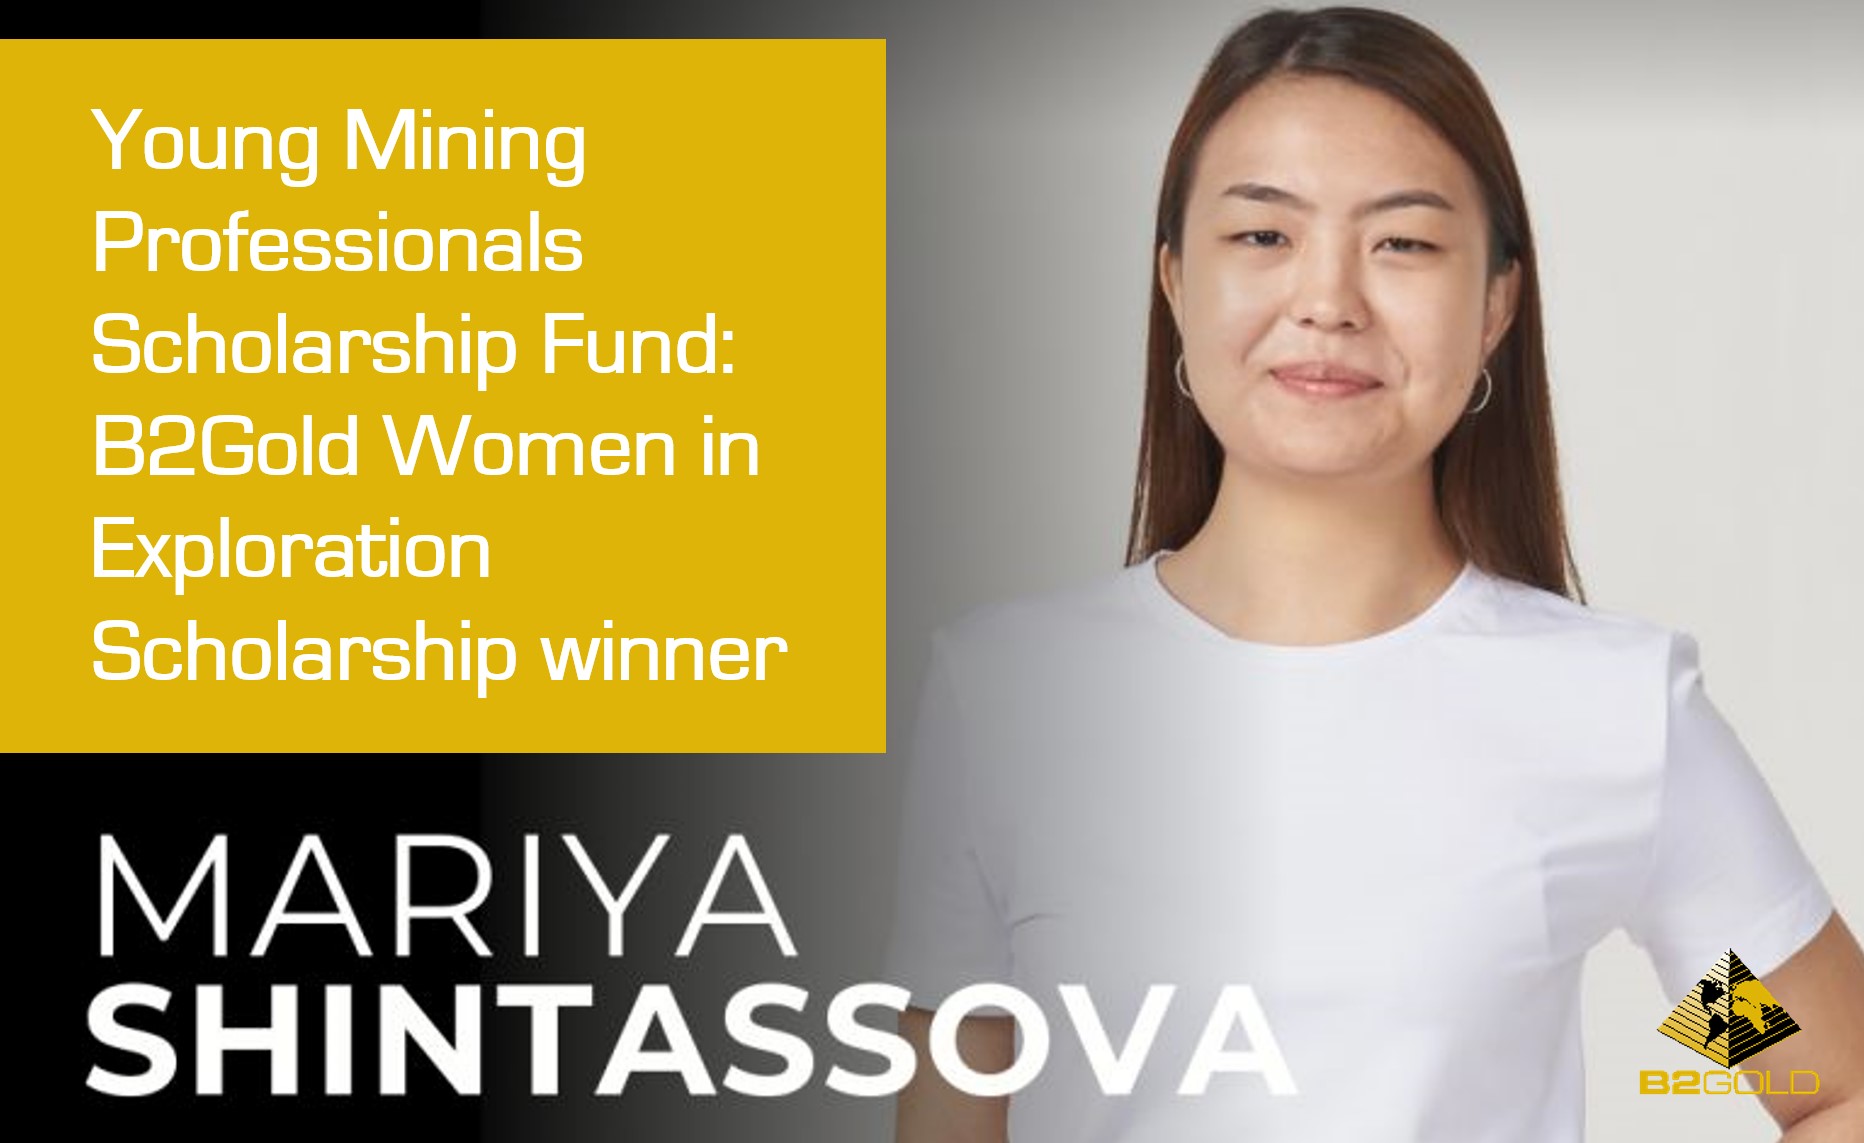 Scholarships to Support Mining’s Next Generation - Feature Image